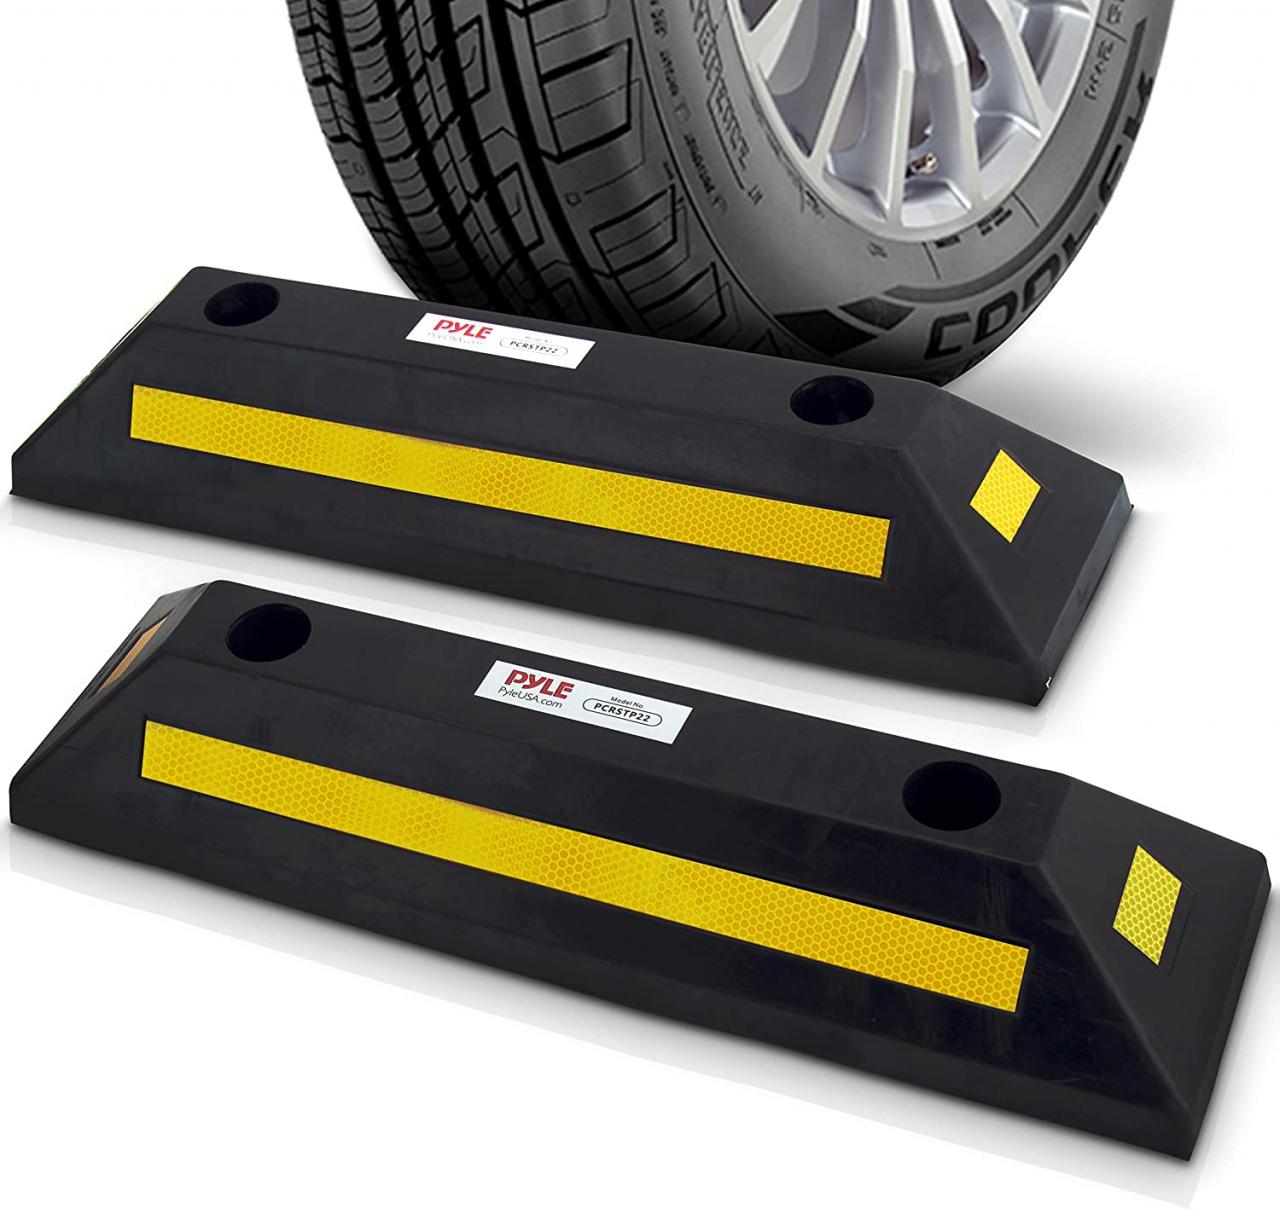 Buy Garage Floor Stops for Vehicles - 2PC Heavy Duty Rubber Vehicle Parking  Lot Target Stoppers, Truck Curb Tire Wheel Guide Blocks, Car Park Aid  Assist Bumpers/Stopper for Driveway Stop - Pyle